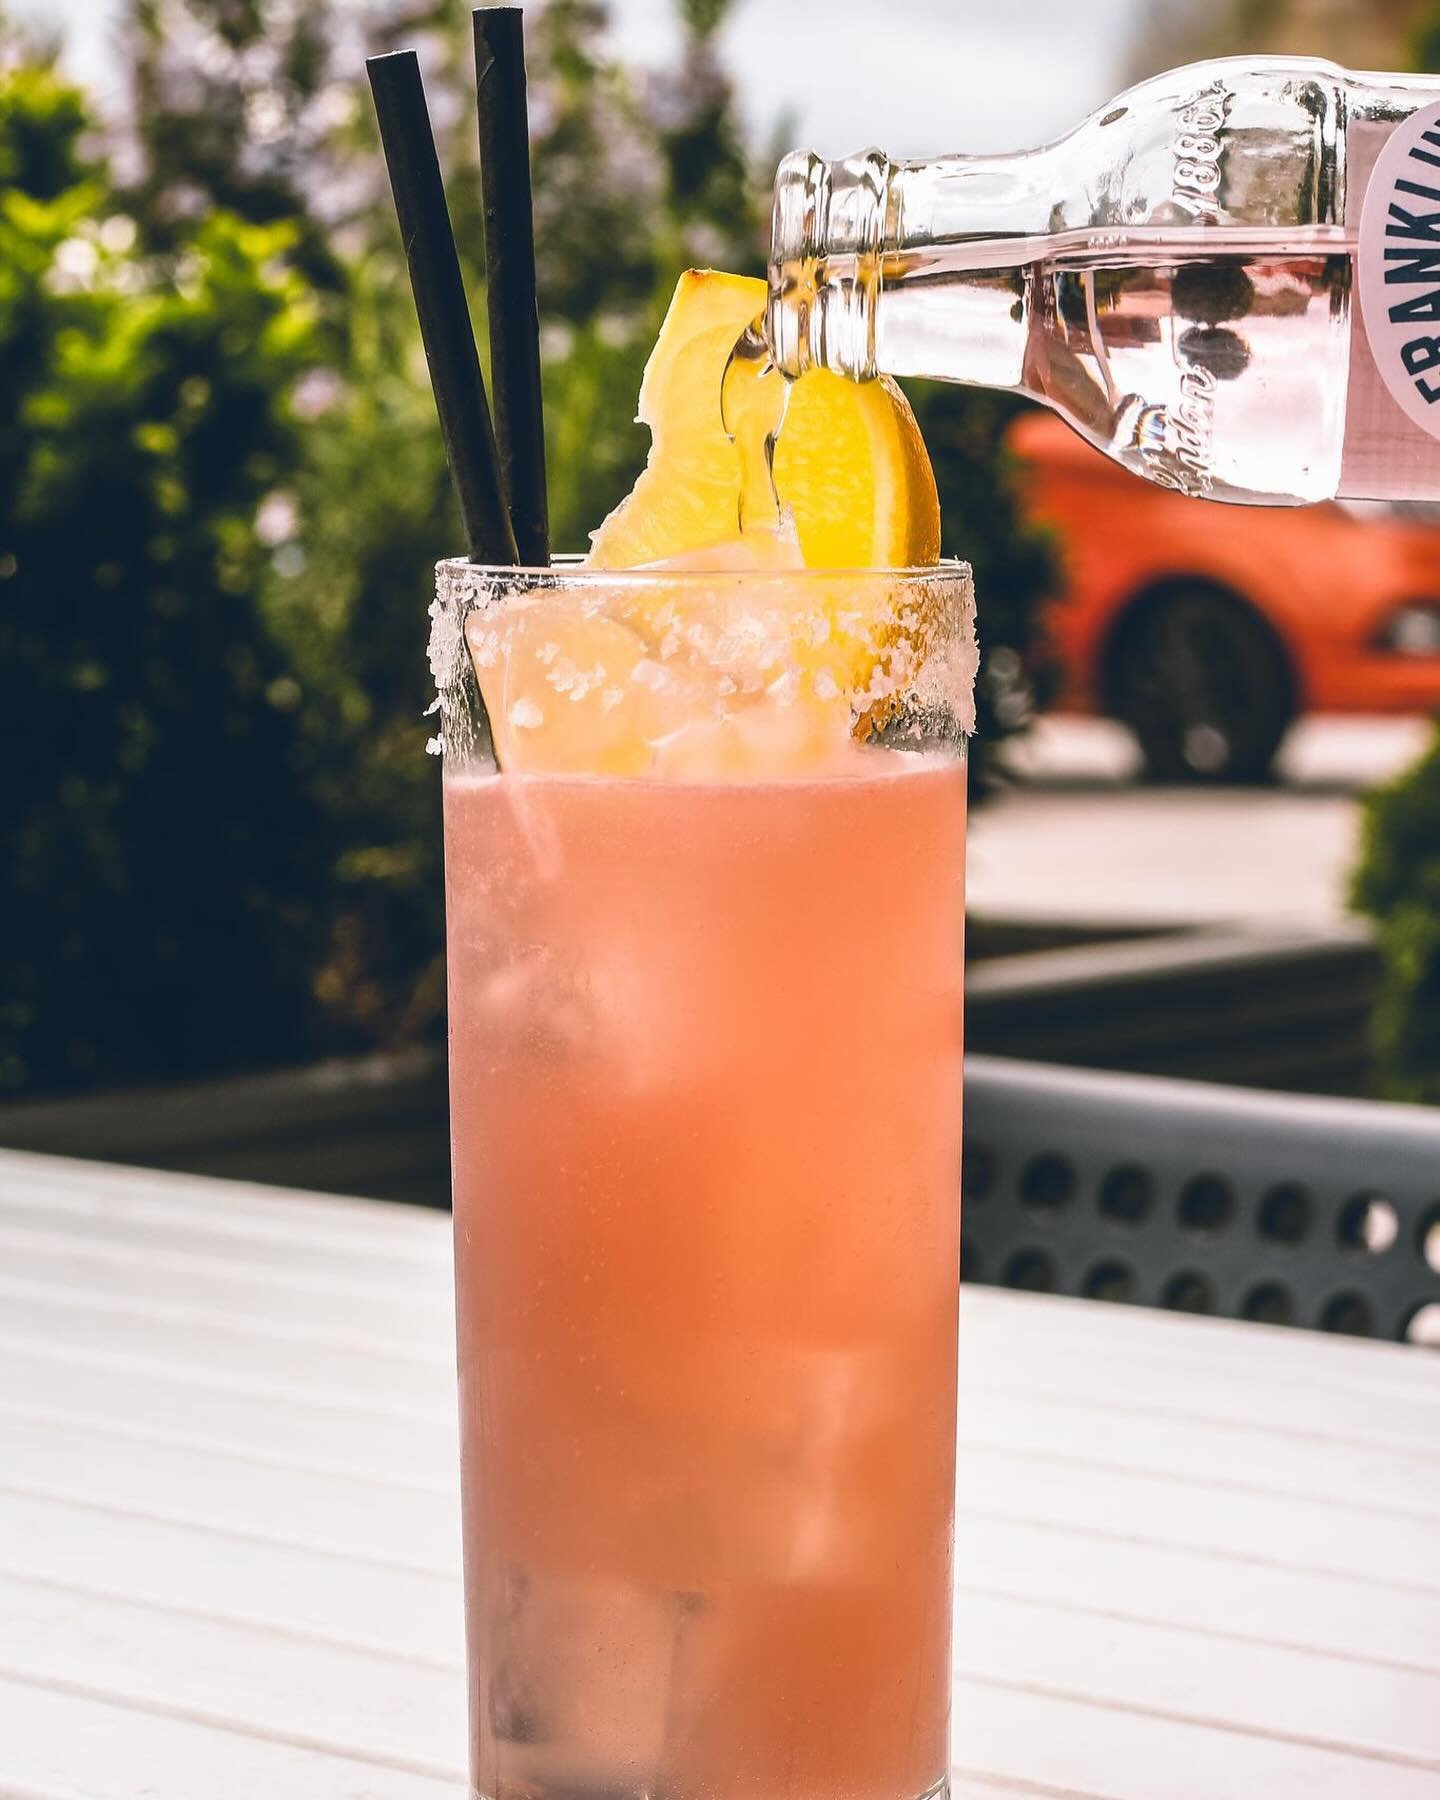 ☀️Rose Paloma ☀️
100% Blue Agave Tequila, rosemary infused grapefruit, lime juice, aromatic bitters and rose lemonade.